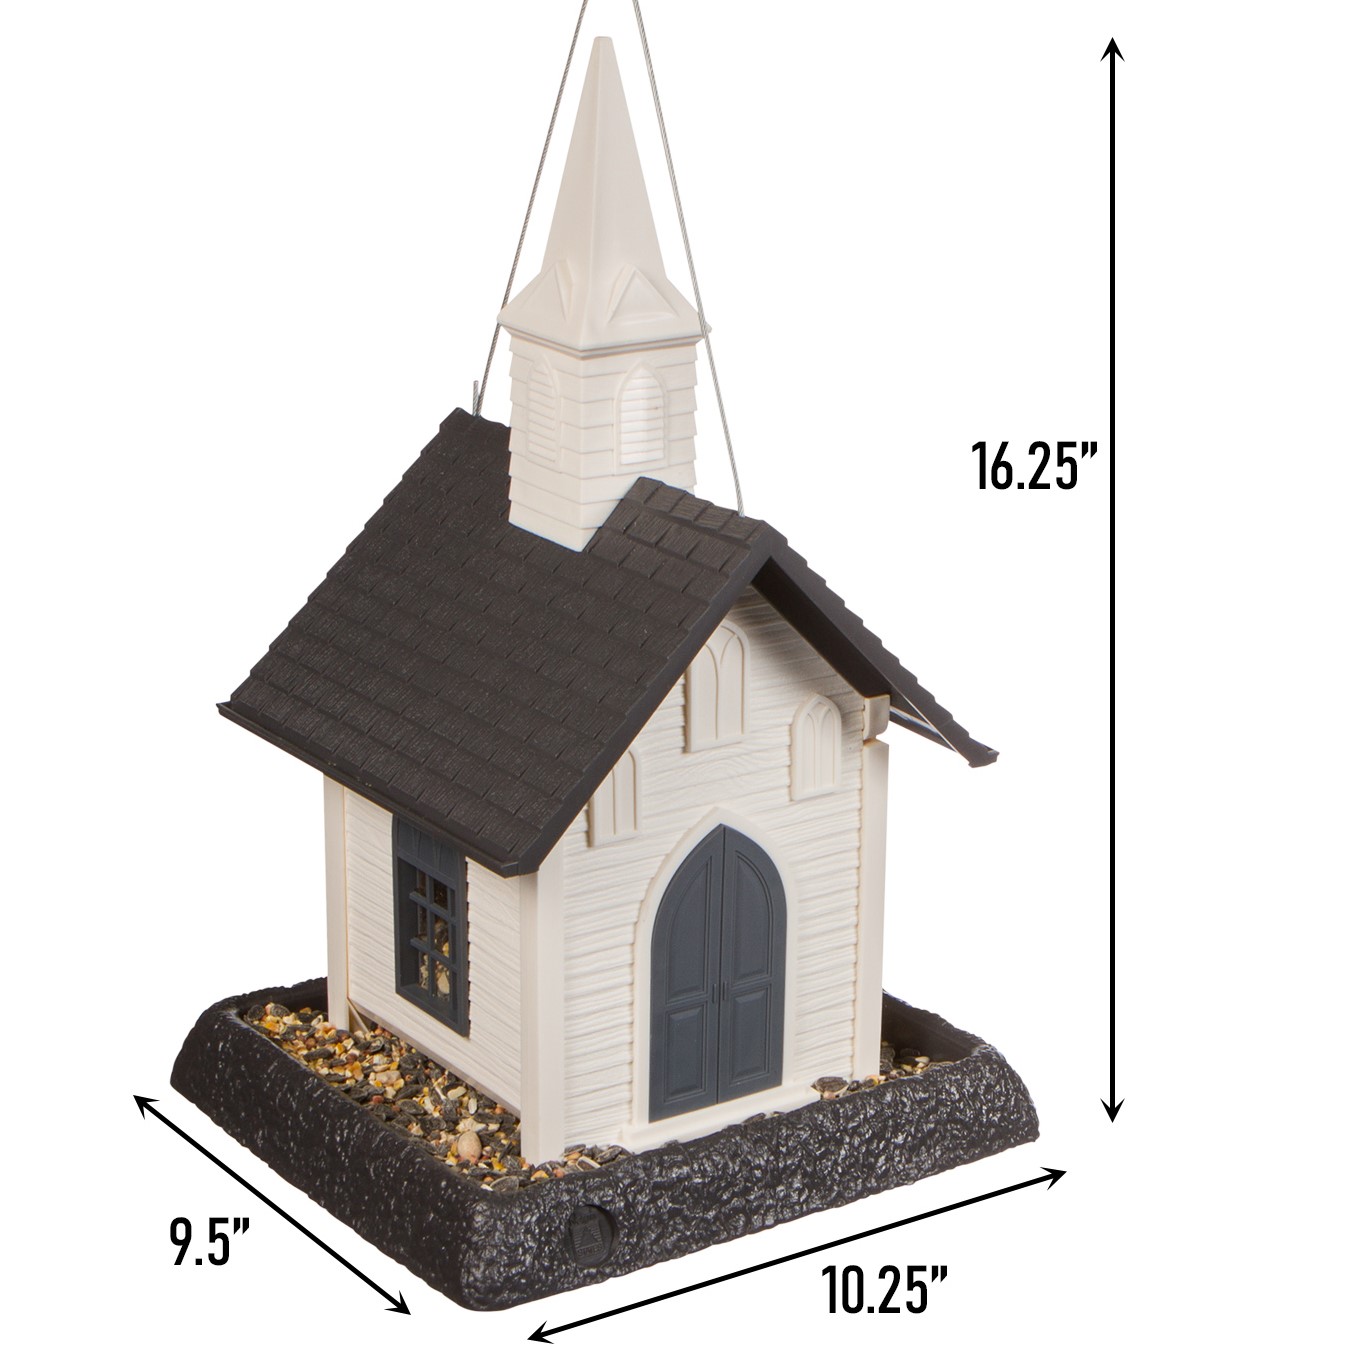 North States Village Collection White and Gray Church Hopper Bird Feeder, 5 lb Capacity - image 5 of 10